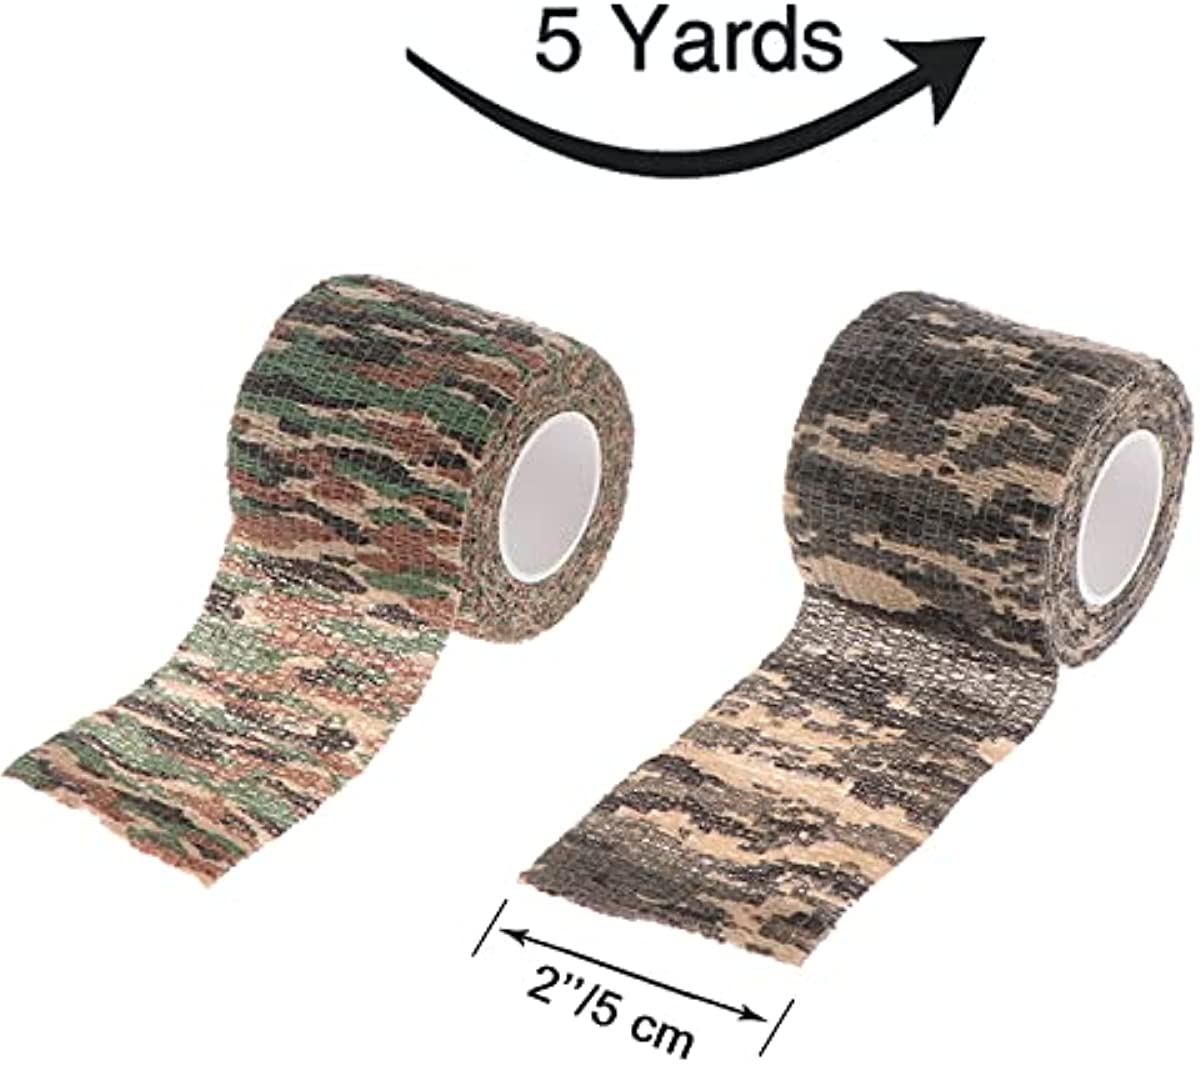 YEEBECA 12 Rolls Sports Tape Athletic, Self Adherent Cohesive Wrap Bandages for Outdoor Sports and Equipment Decoration, Athletic Tape 2 inch - 5 Yards Each